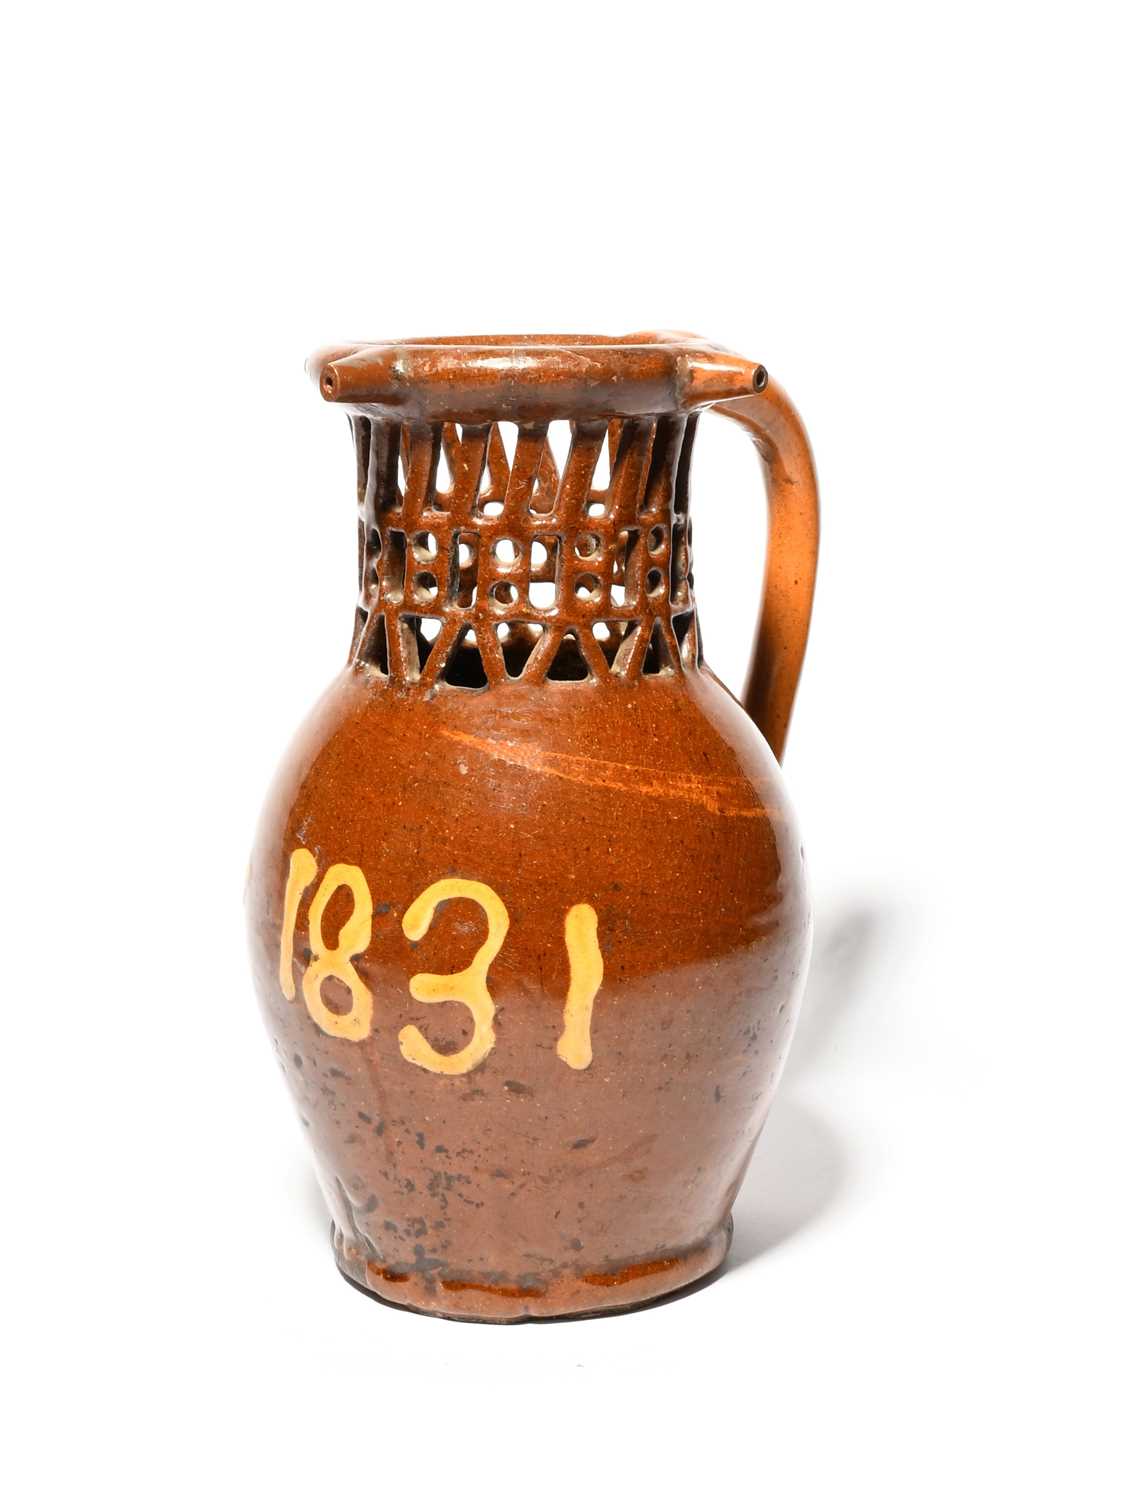 A large slipware puzzle jug, dated 1831, inscribed 'J + ny 1831' in cream slip on a rich treacle